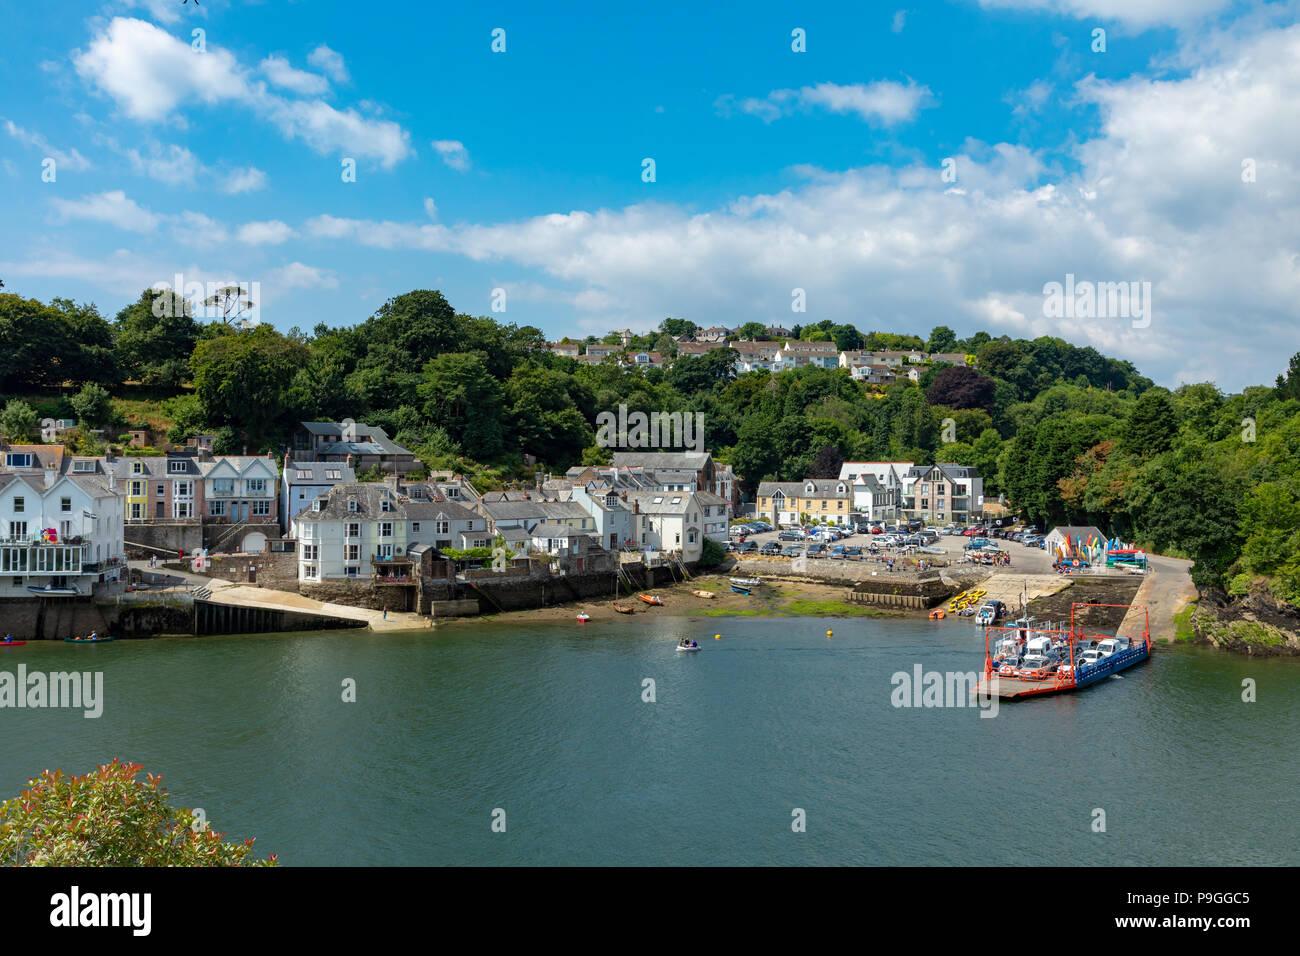 Fowey Cornwall England July 14, 2018 View across the River Fowey from Bodinnick, showing the car ferry Stock Photo